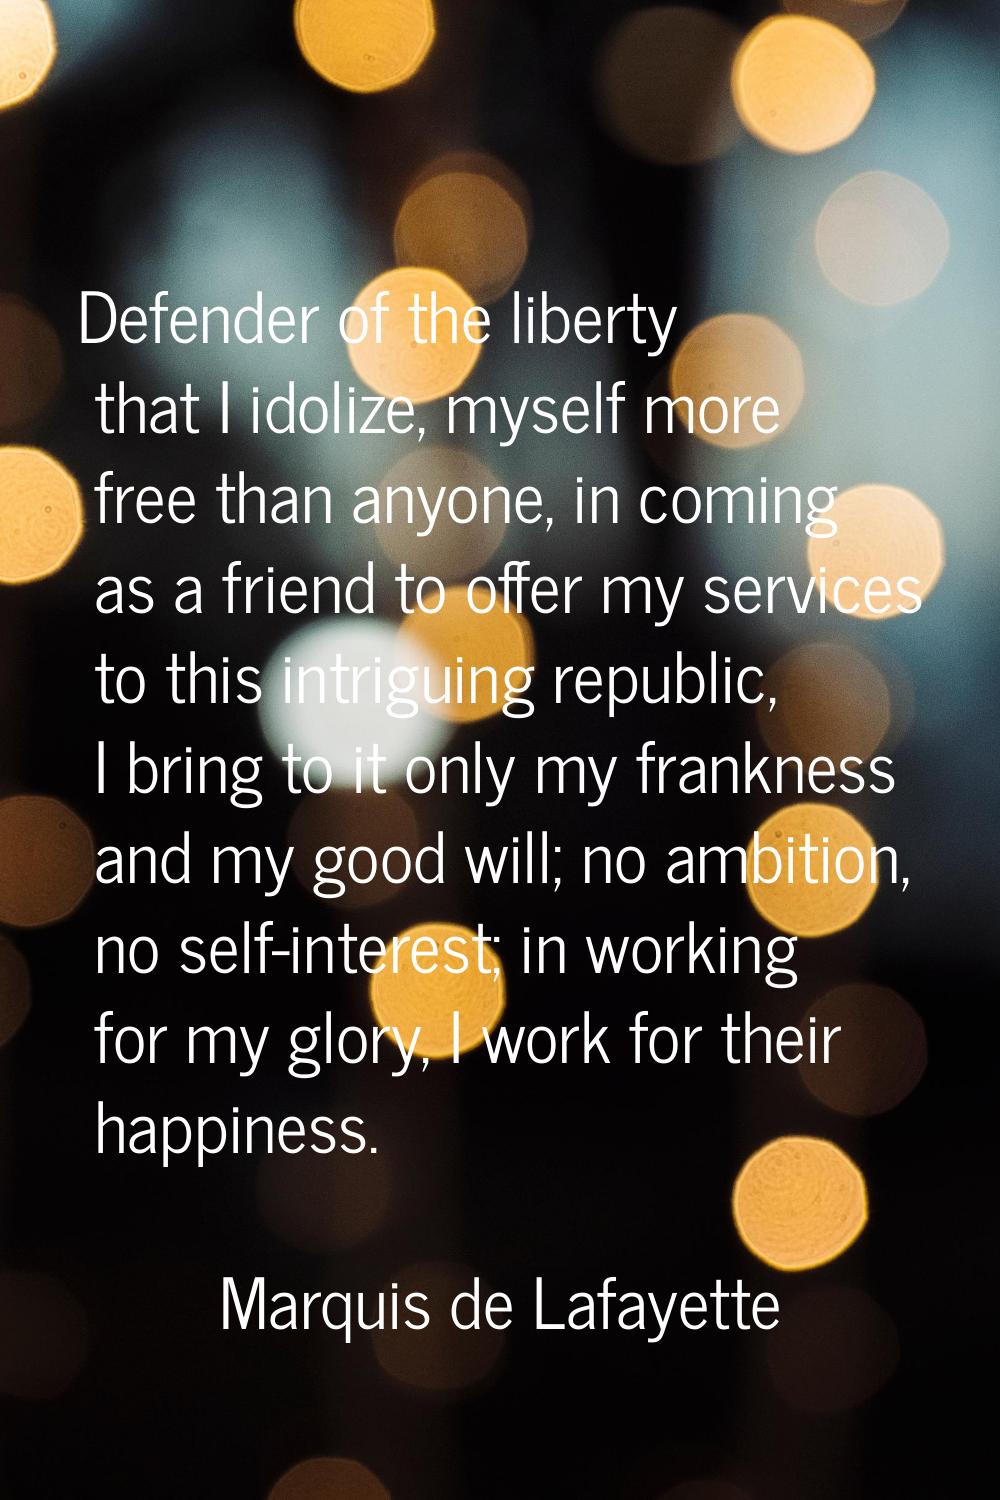 Defender of the liberty that I idolize, myself more free than anyone, in coming as a friend to offe